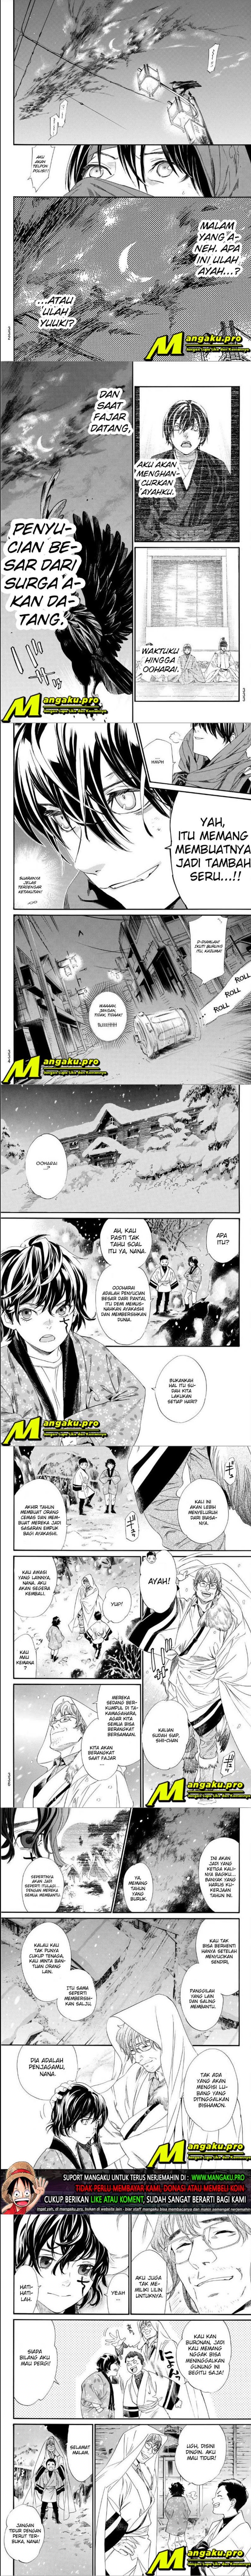 Noragami Chapter 92